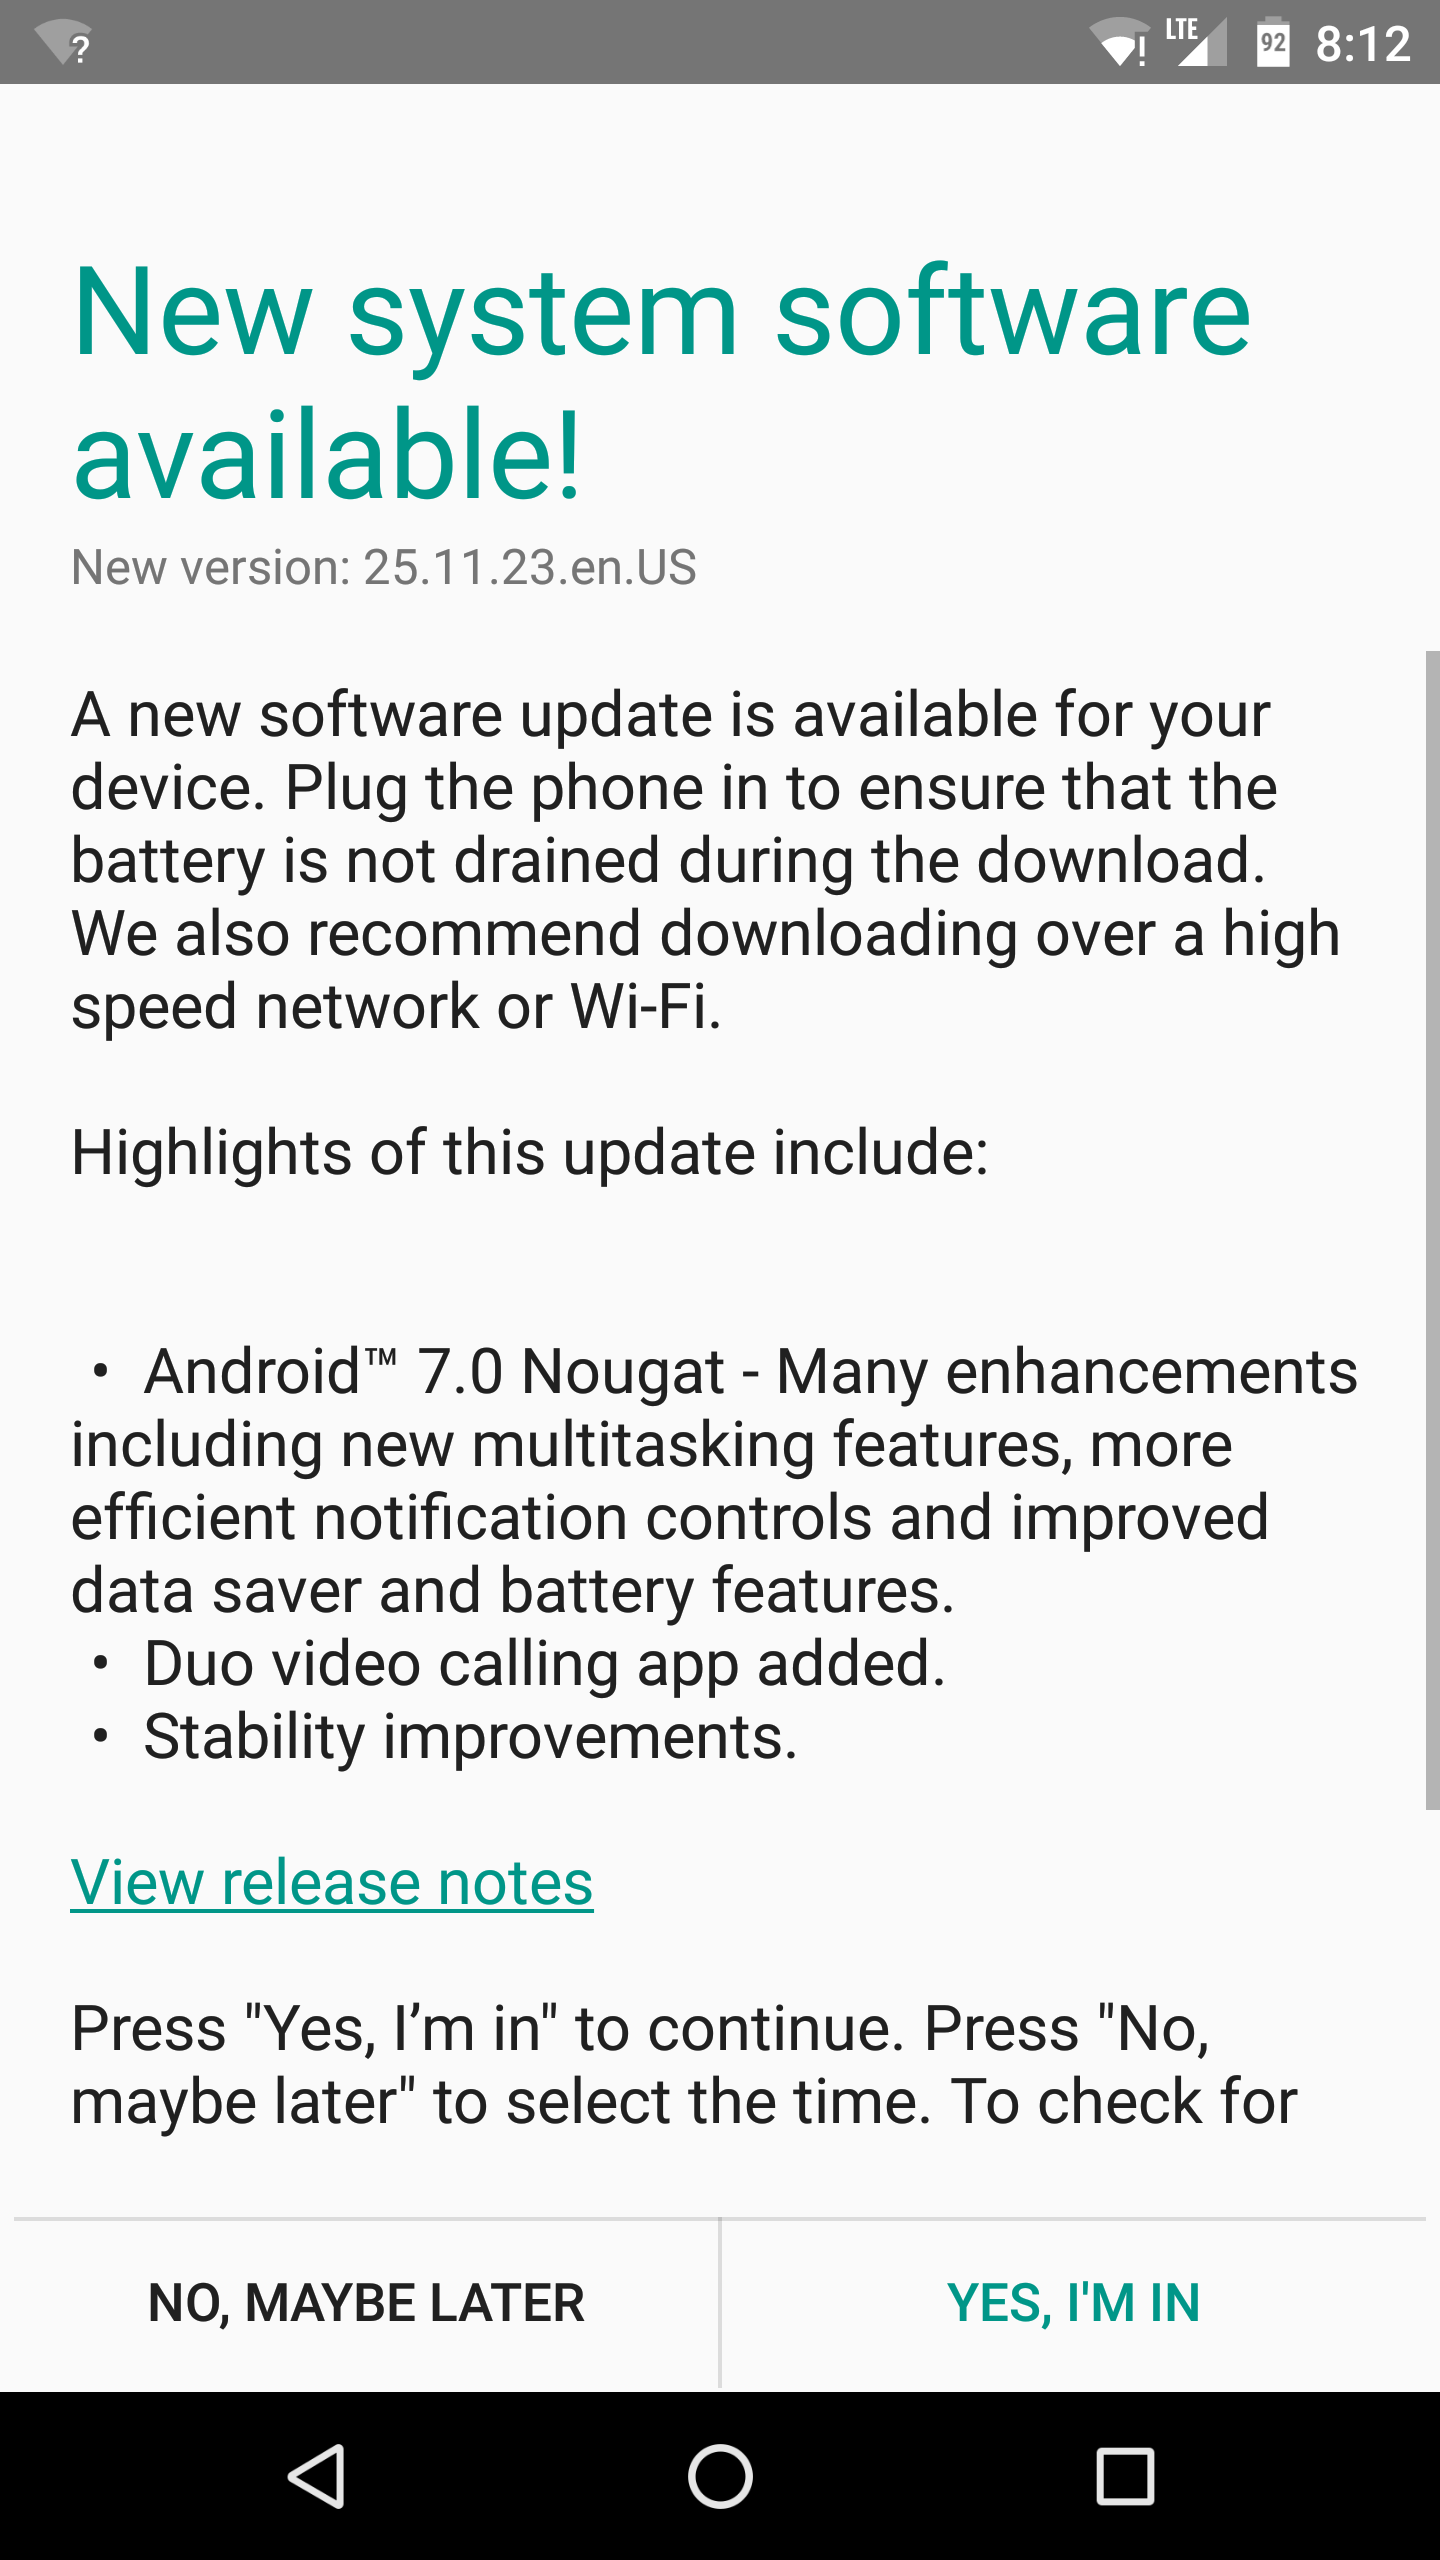 Motorola resumes roll-out of Android 7.0 Nougat for Moto X Pure Edition in the US